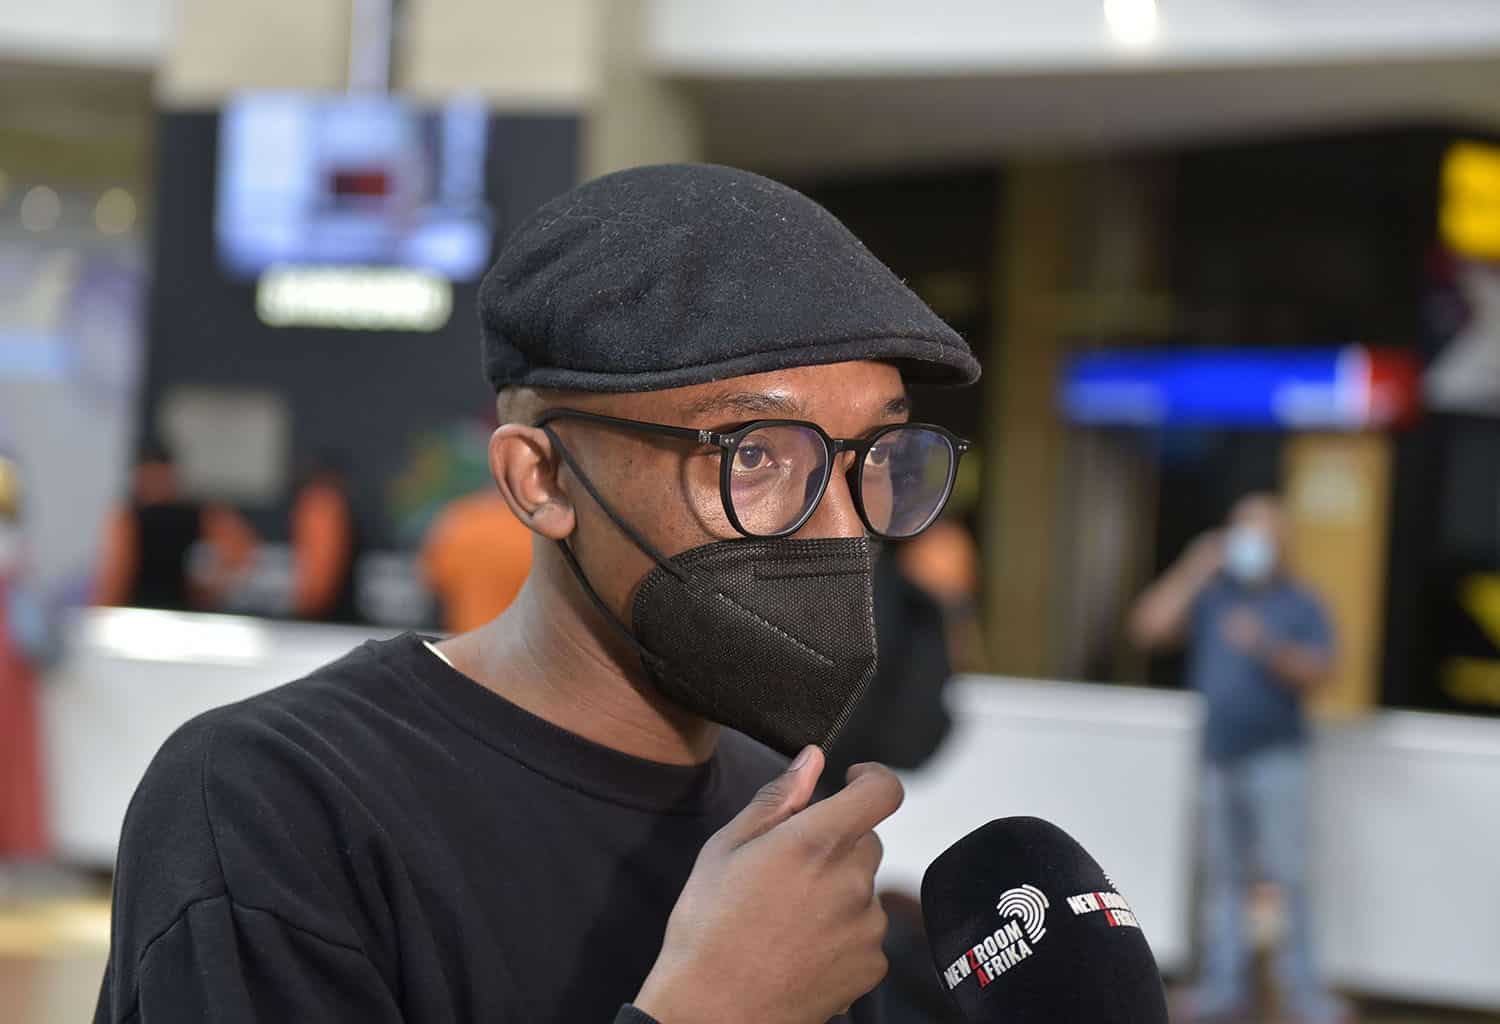 Koane Molefe speaks to media at OR Tambo international airport upon return to South Africa after being in Ukraine when the war broke out, 7 March 2022. Picture: Neil McCartney